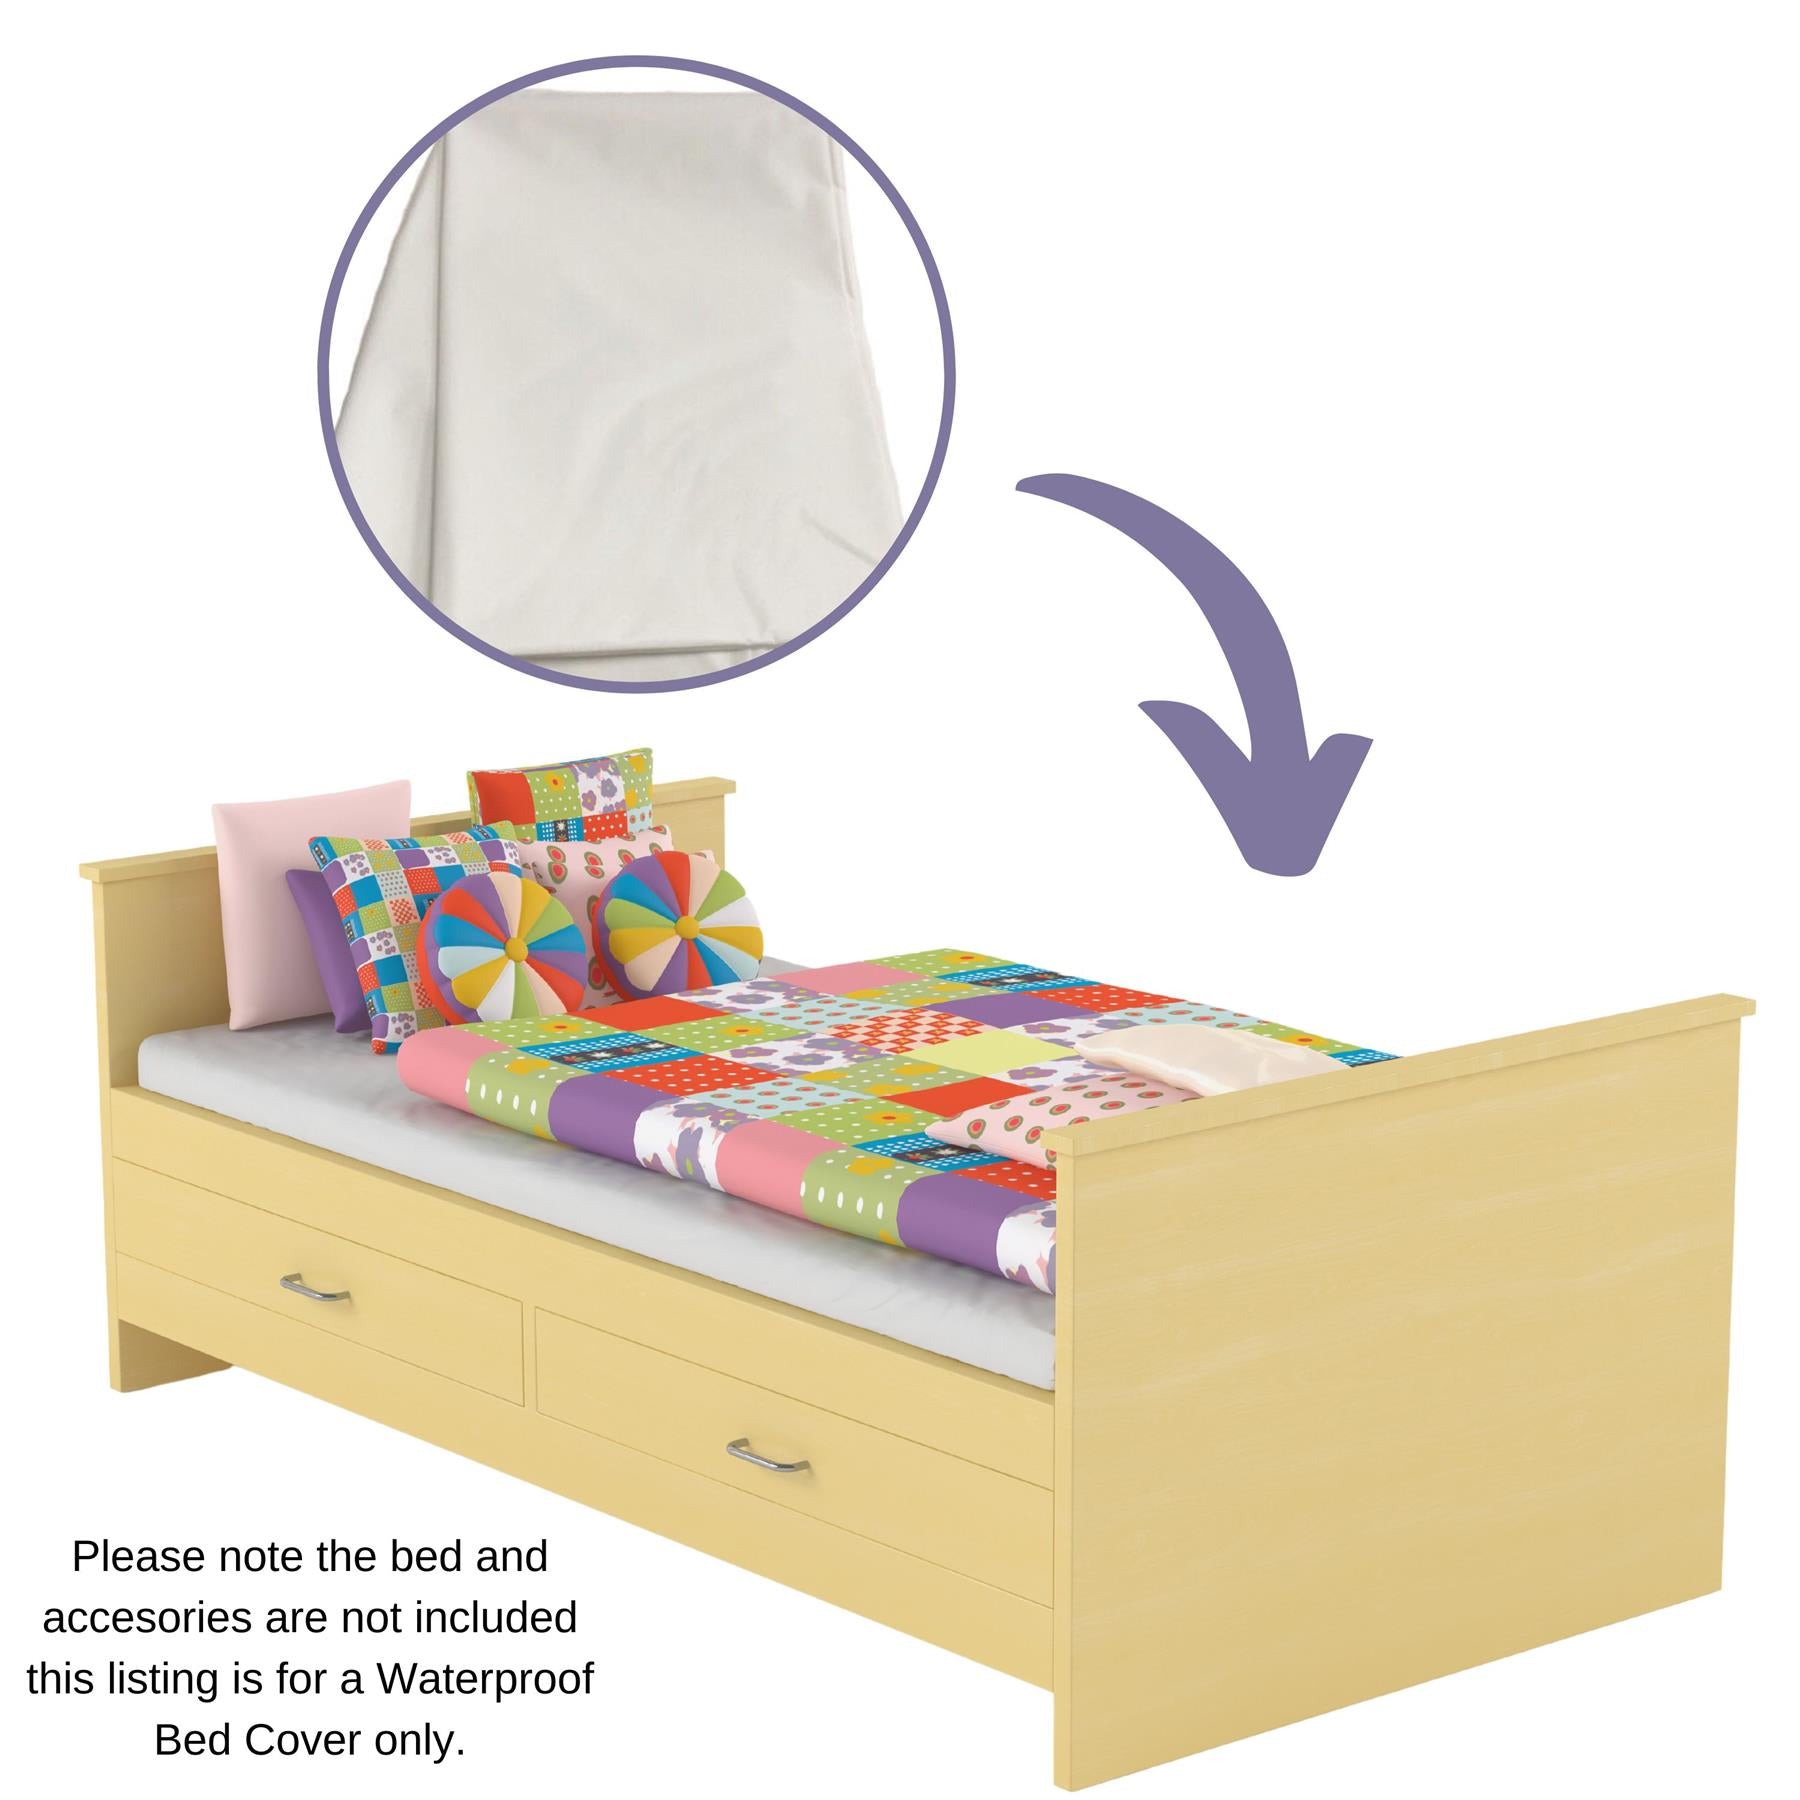 The Magic Toy Shop Waterproof Bed Cover Waterproof Bed Cover